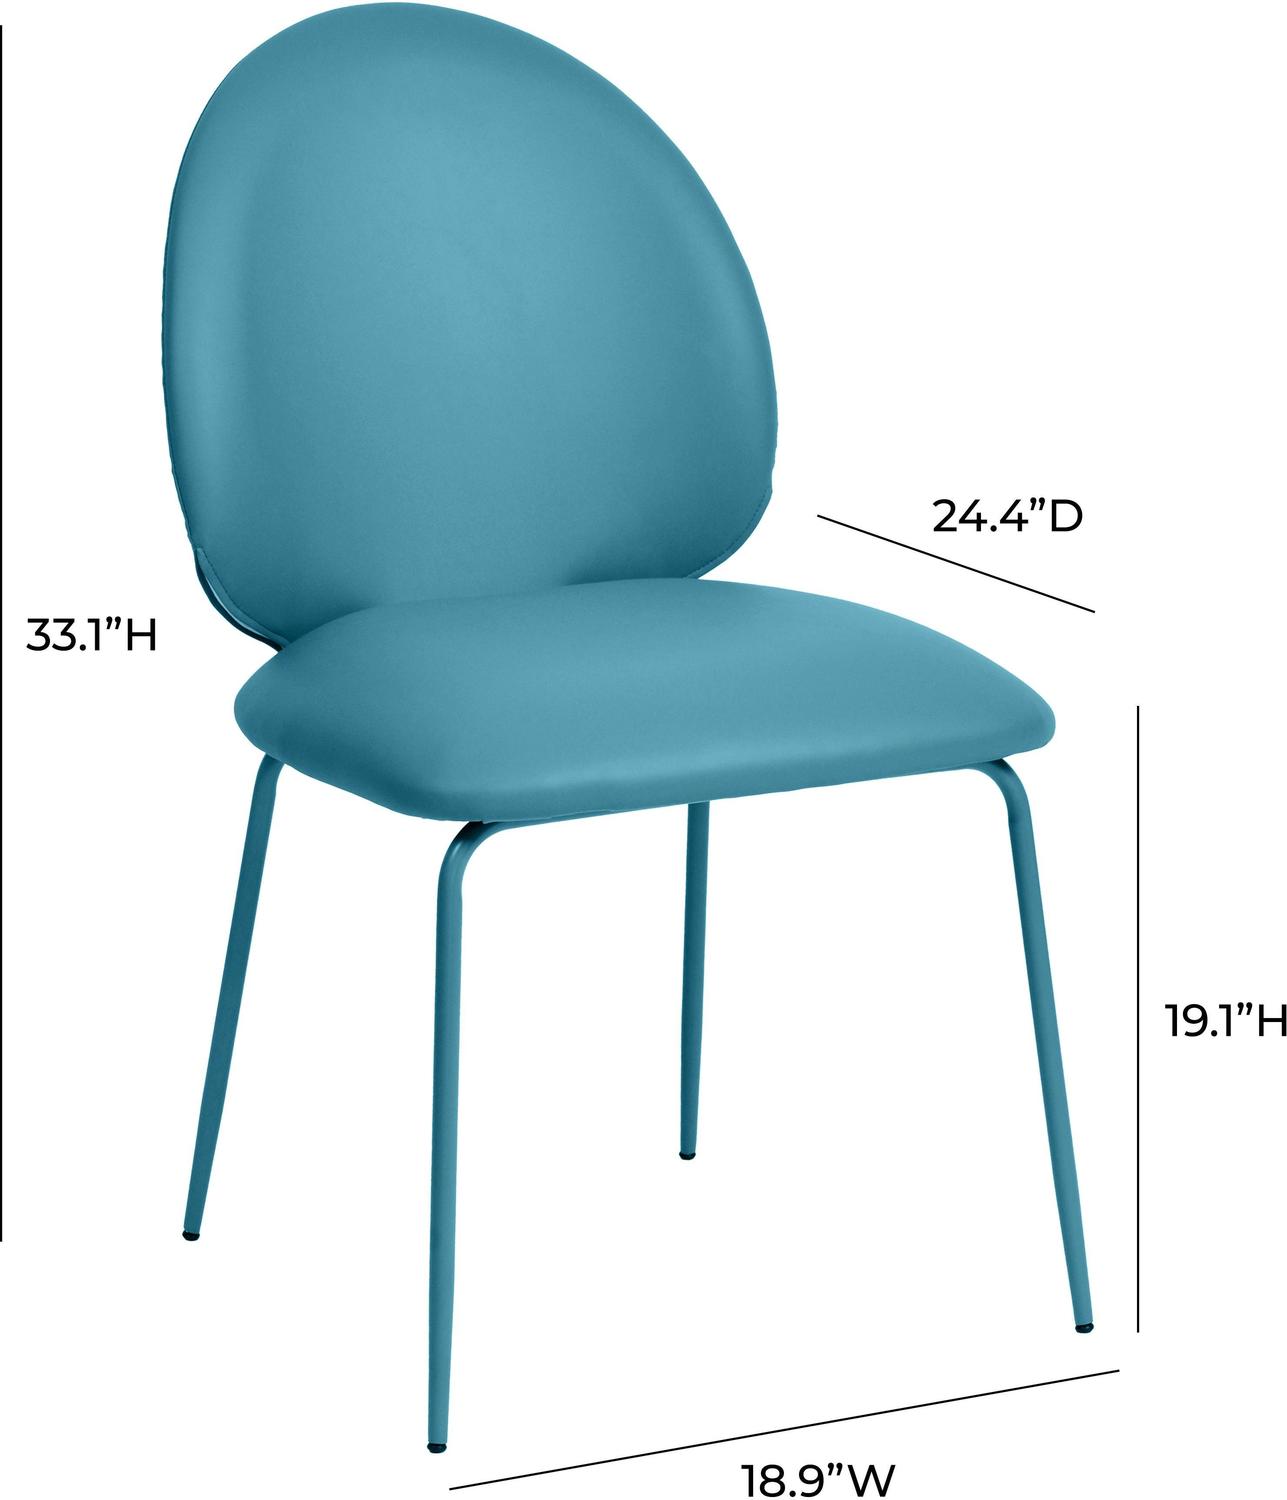 moon armchair Contemporary Design Furniture Dining Chairs Blue